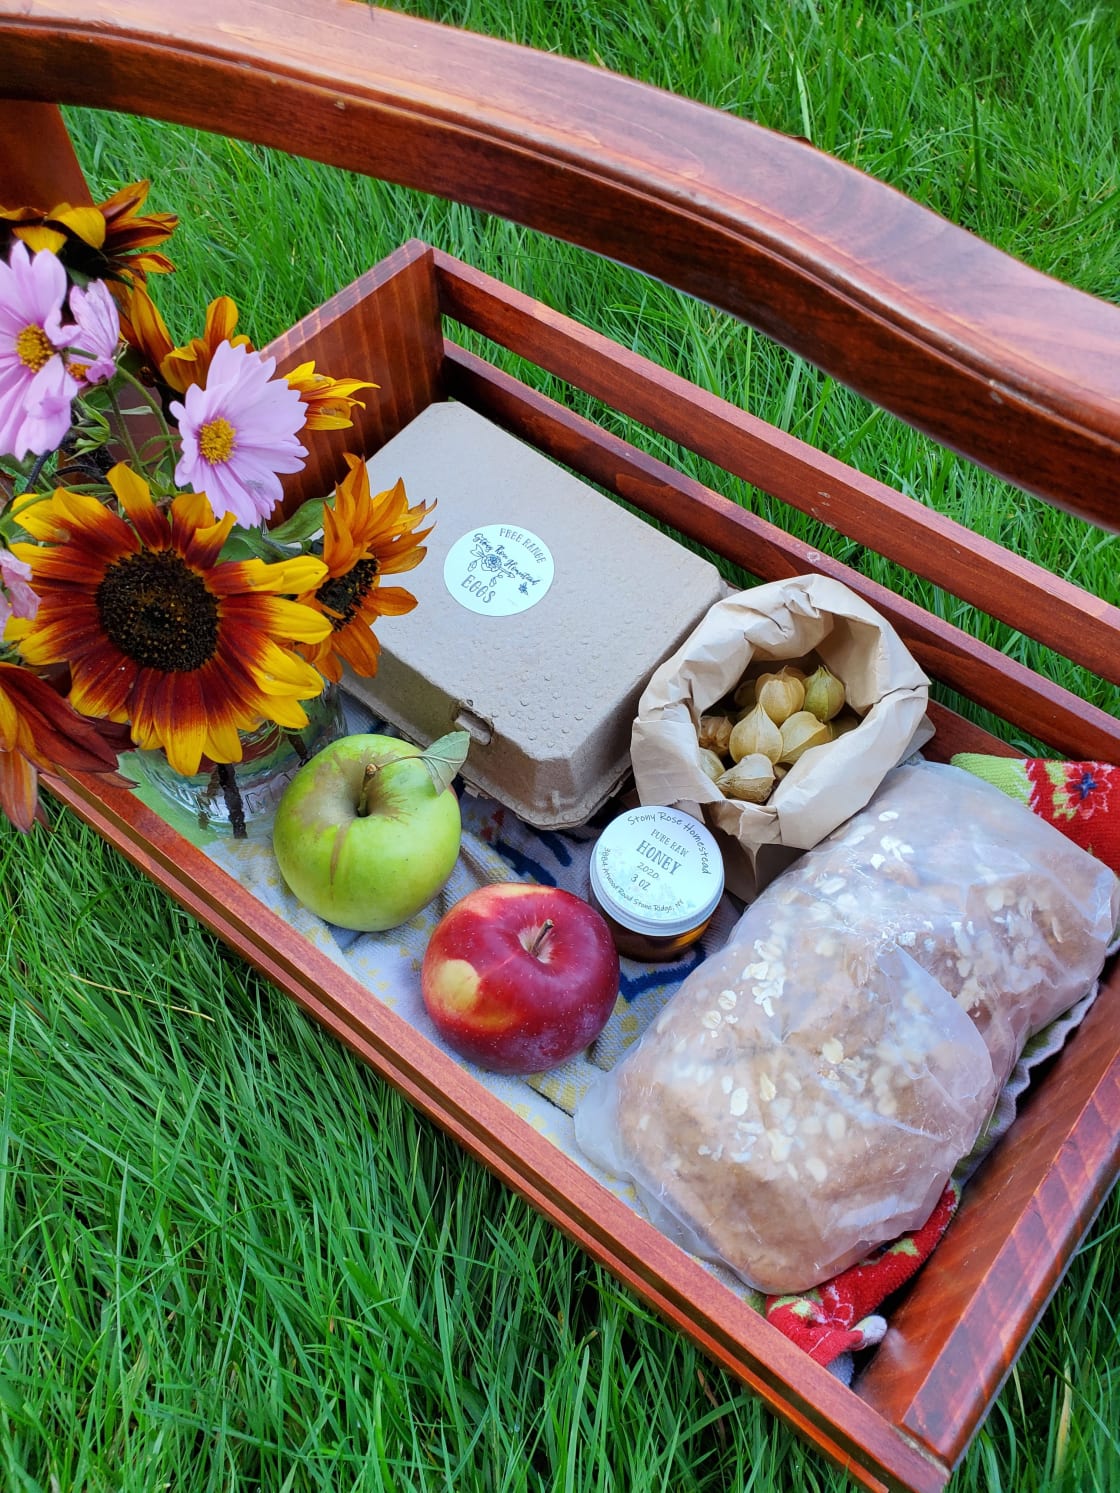 Enjoy one of our breakfast baskets full of fresh locally grown goodness.